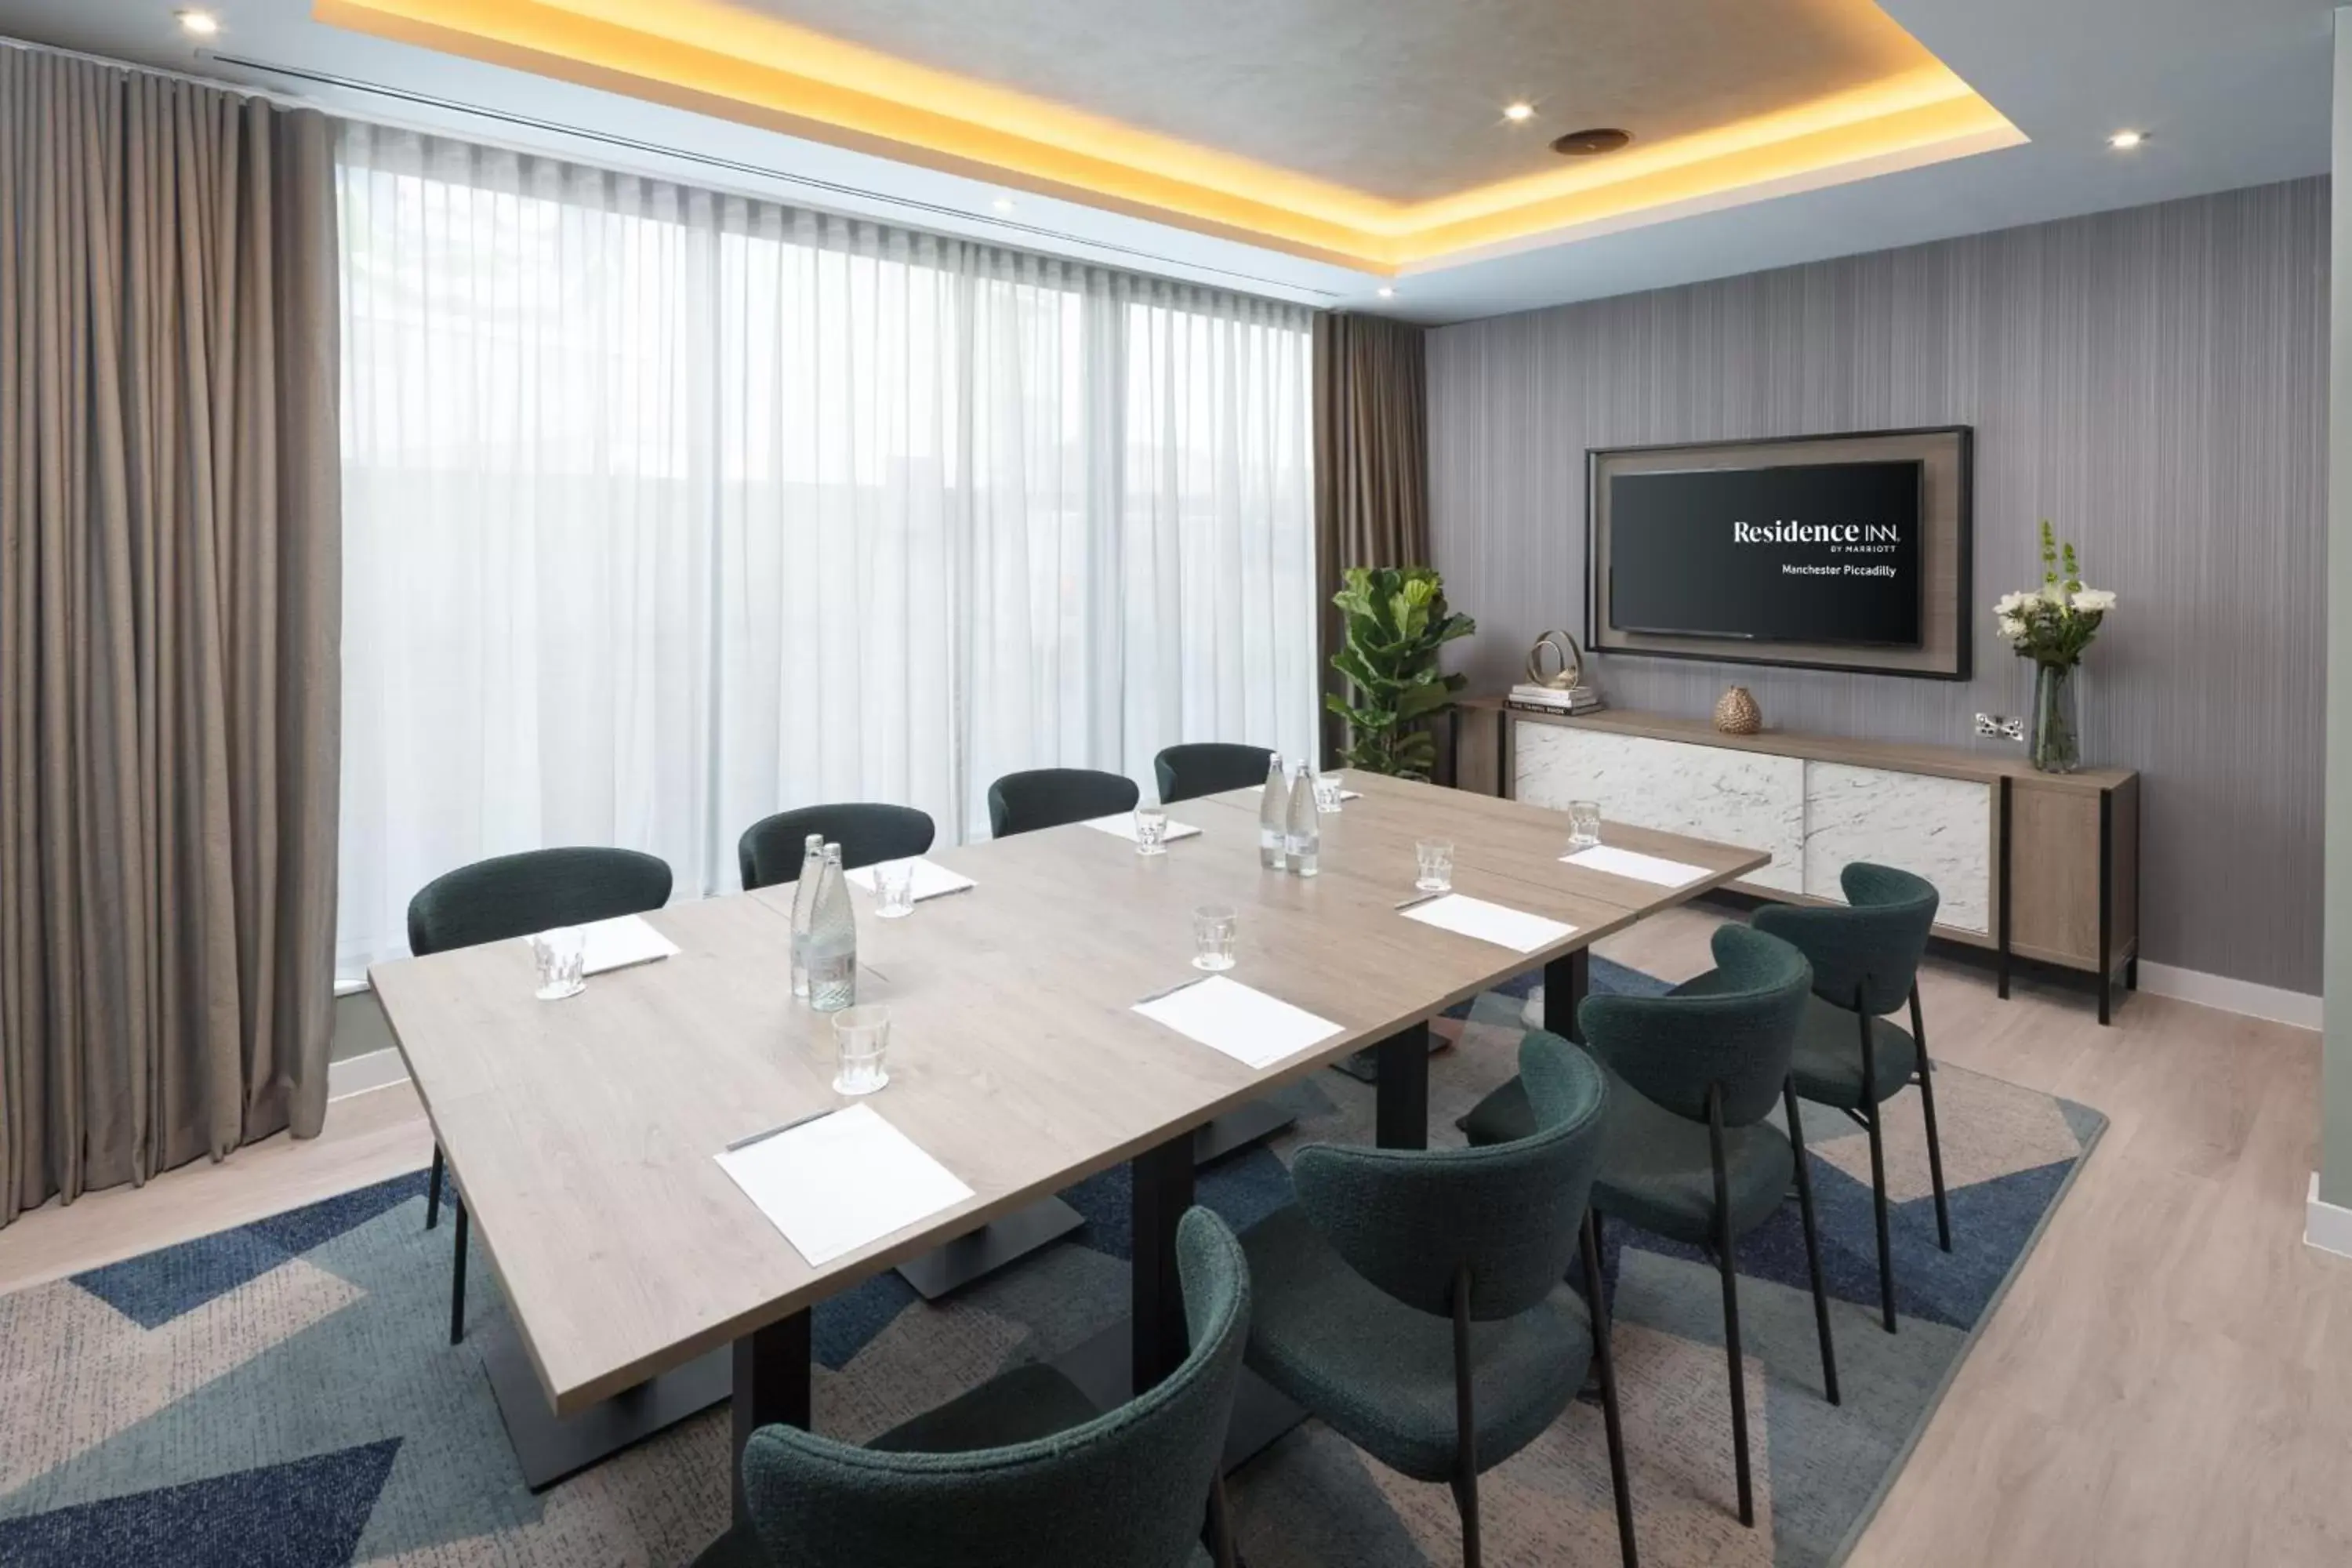 Meeting/conference room in Residence Inn by Marriott Manchester Piccadilly